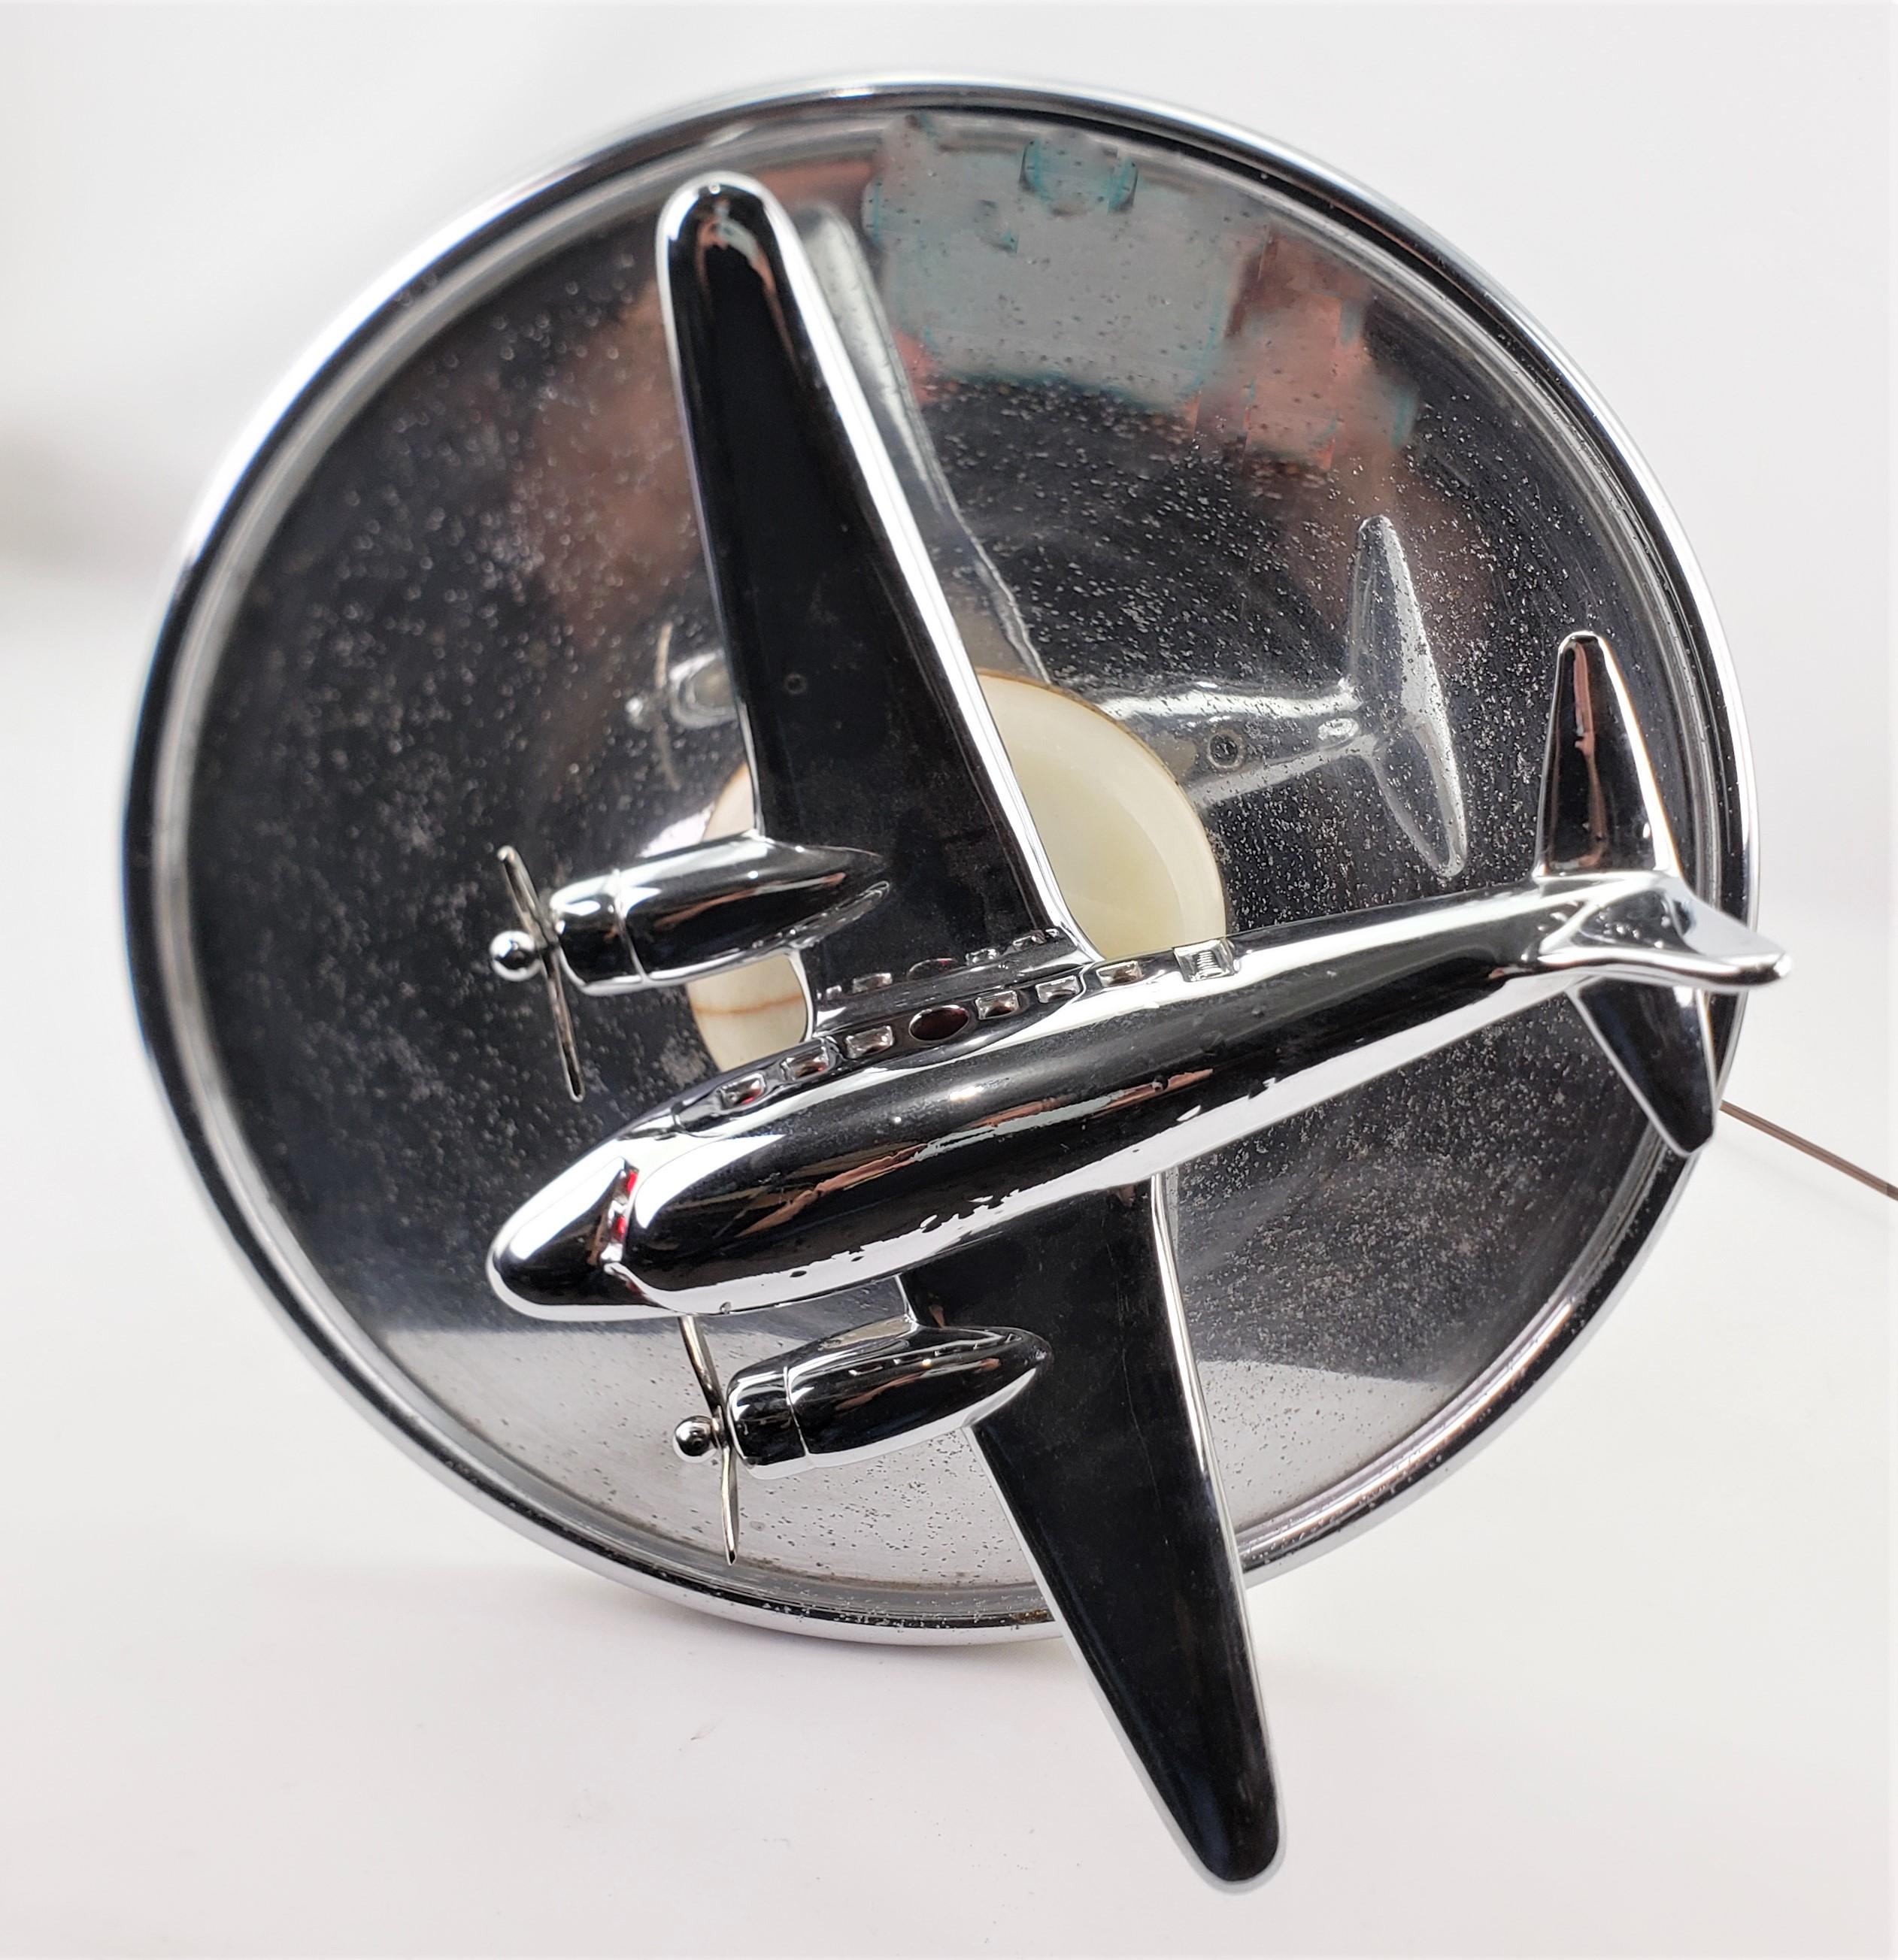 Art Deco Styled Chrome Lighted Airplane Smoker's Ashtray Stand or Accent Table For Sale 2